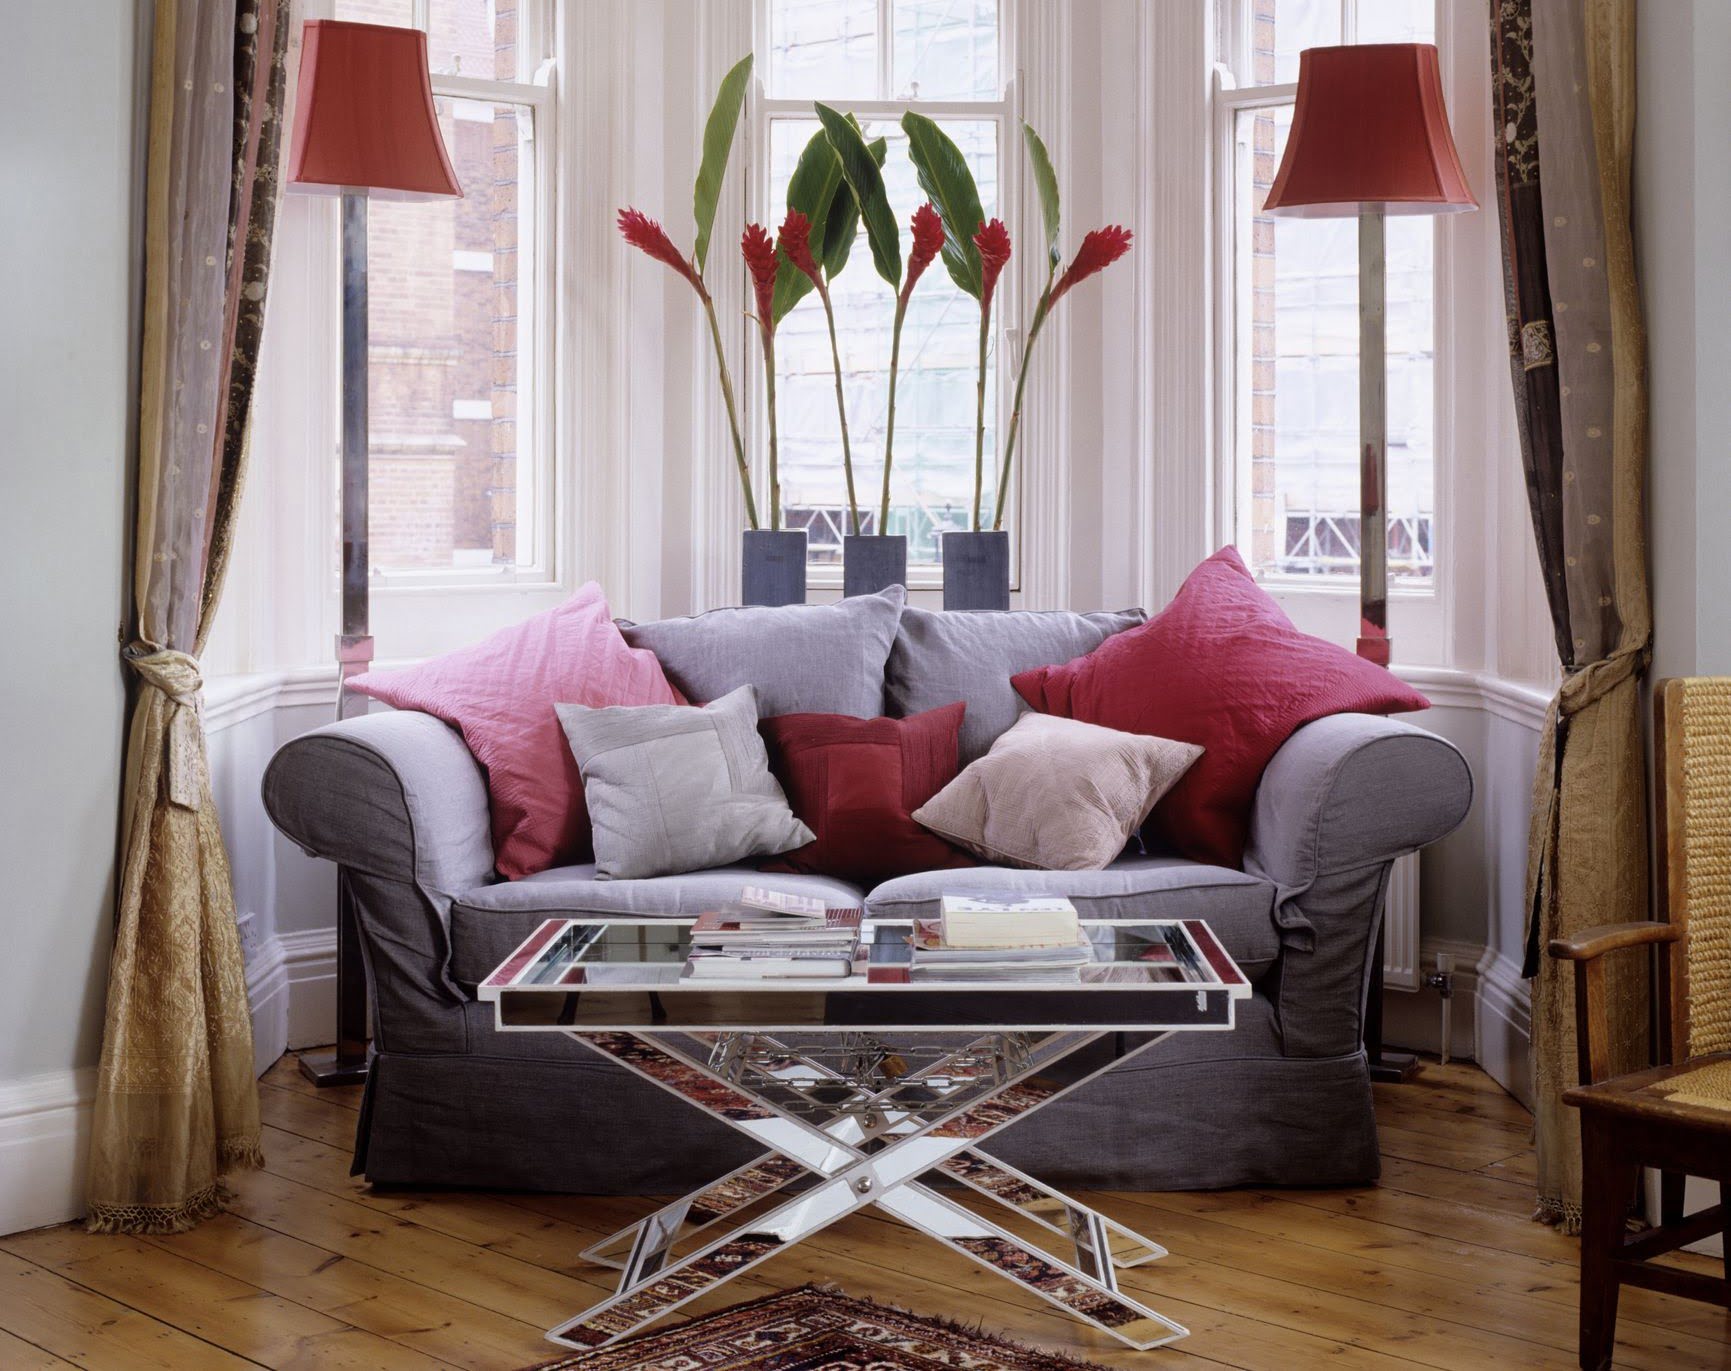 How To Decorate A Living Room With A Bay Window